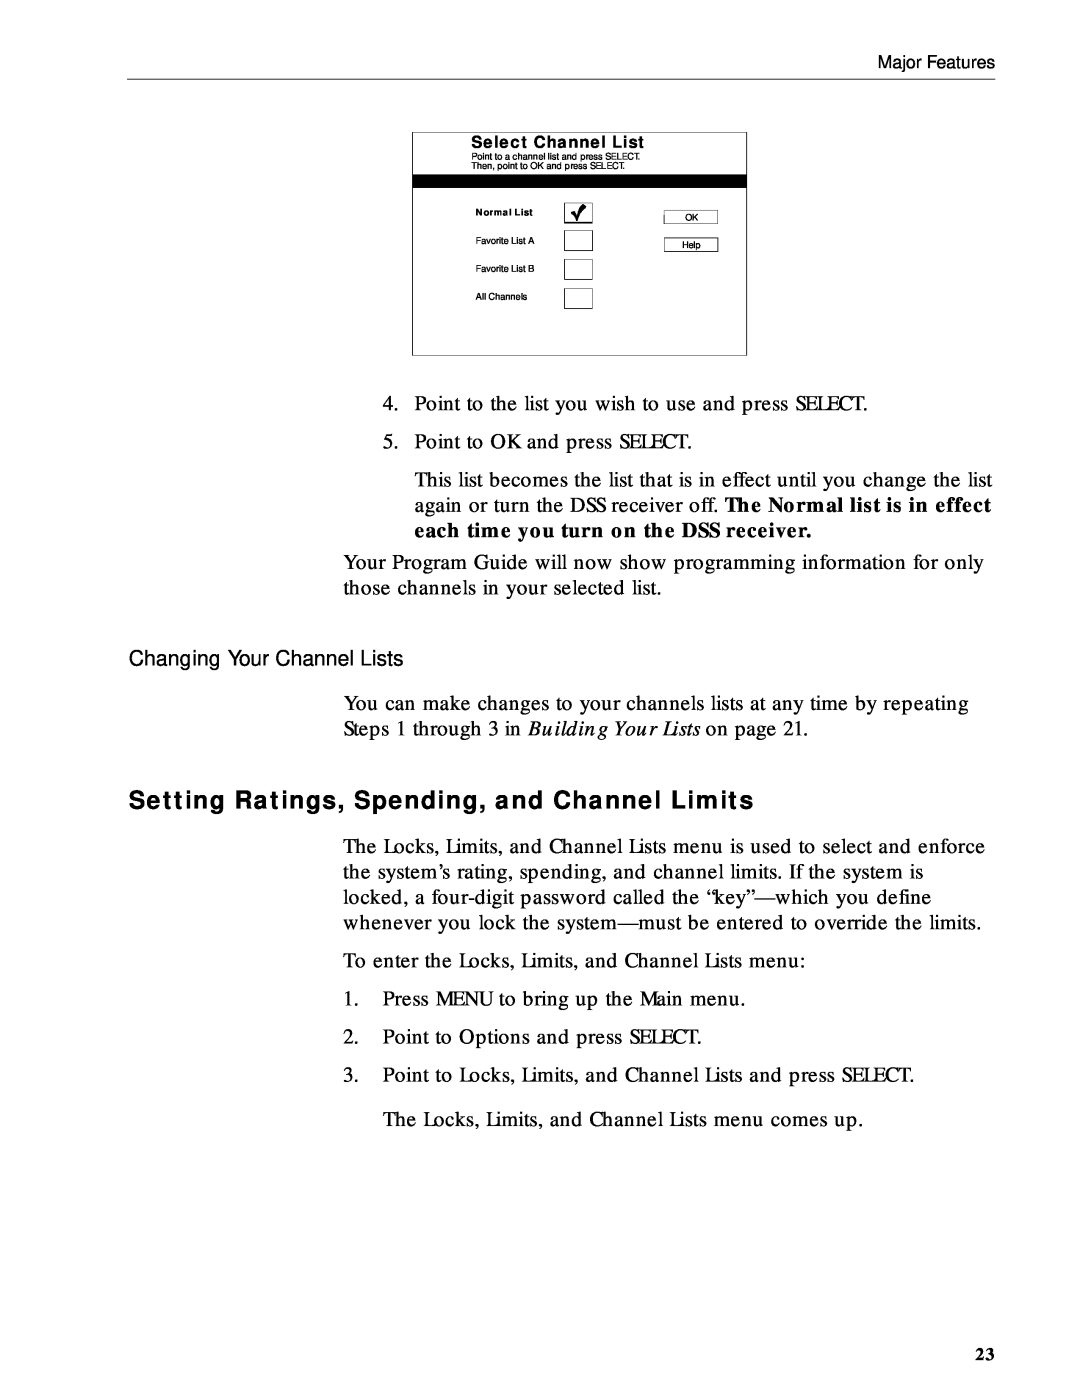 RCA DRD212NW user manual Setting Ratings, Spending, and Channel Limits 